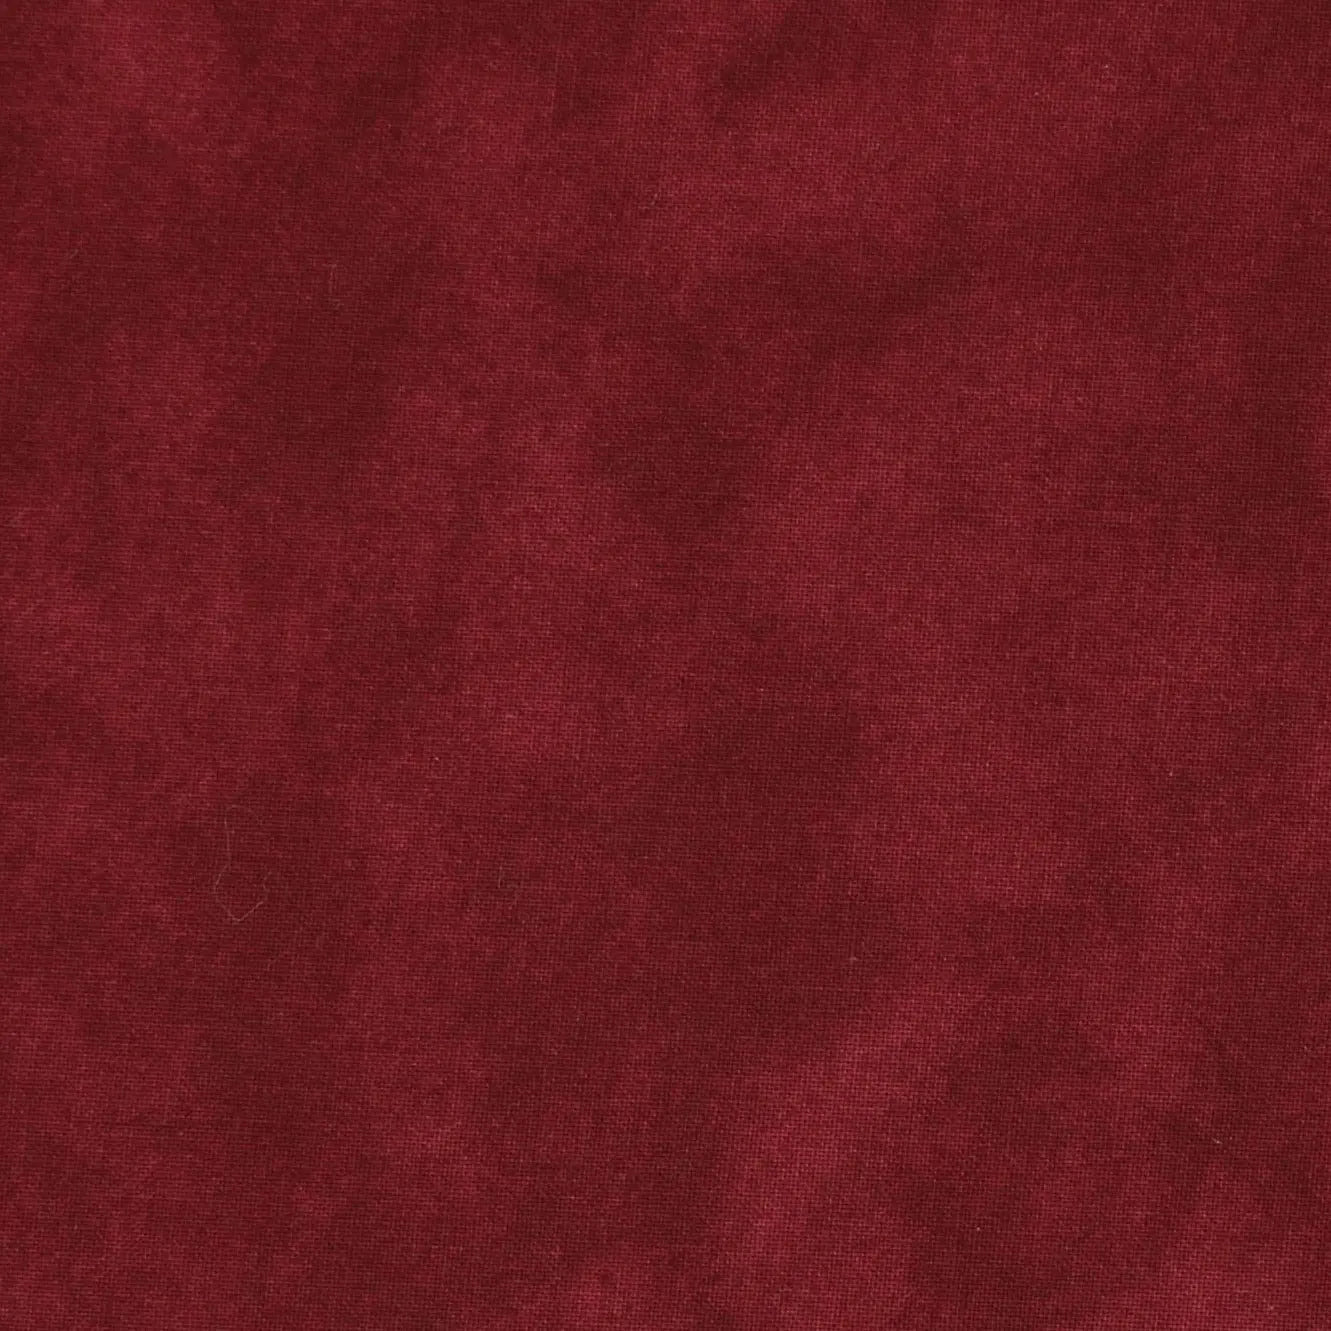 Red Burgundy Color Waves Cotton Wideback Fabric per yard